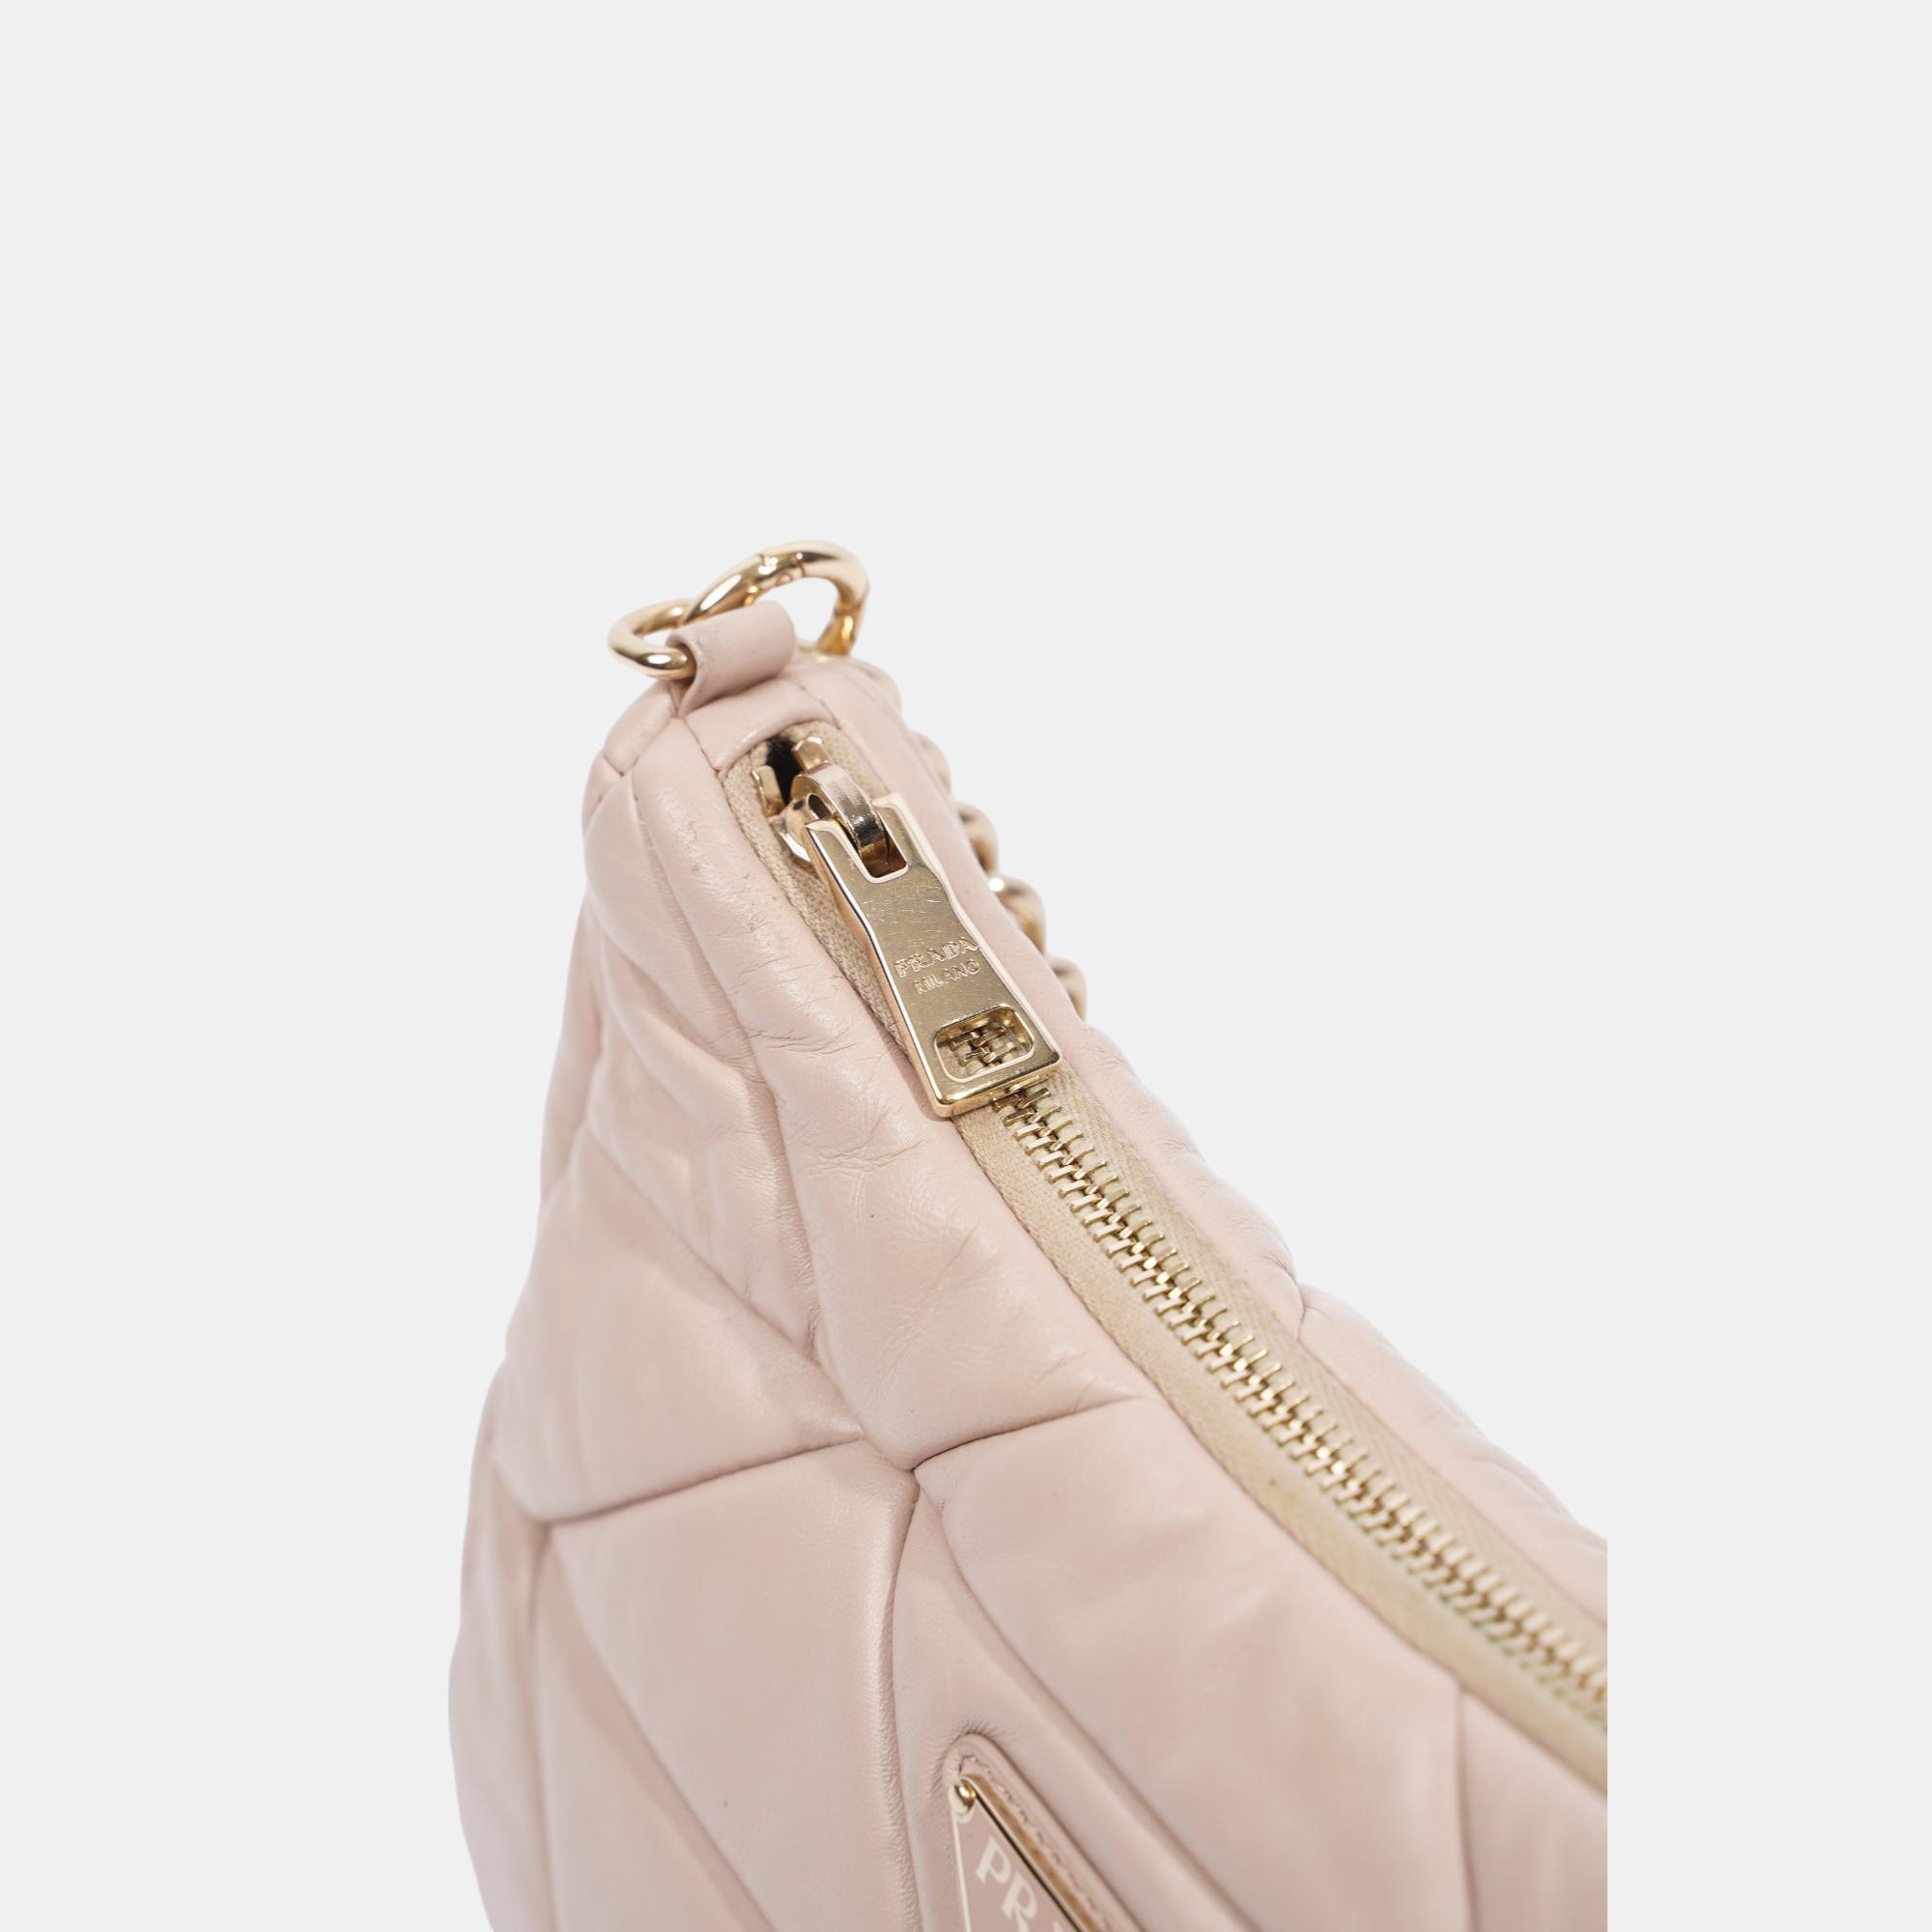 Prada Womens System Patchwork Bag Nude Nappa Leather